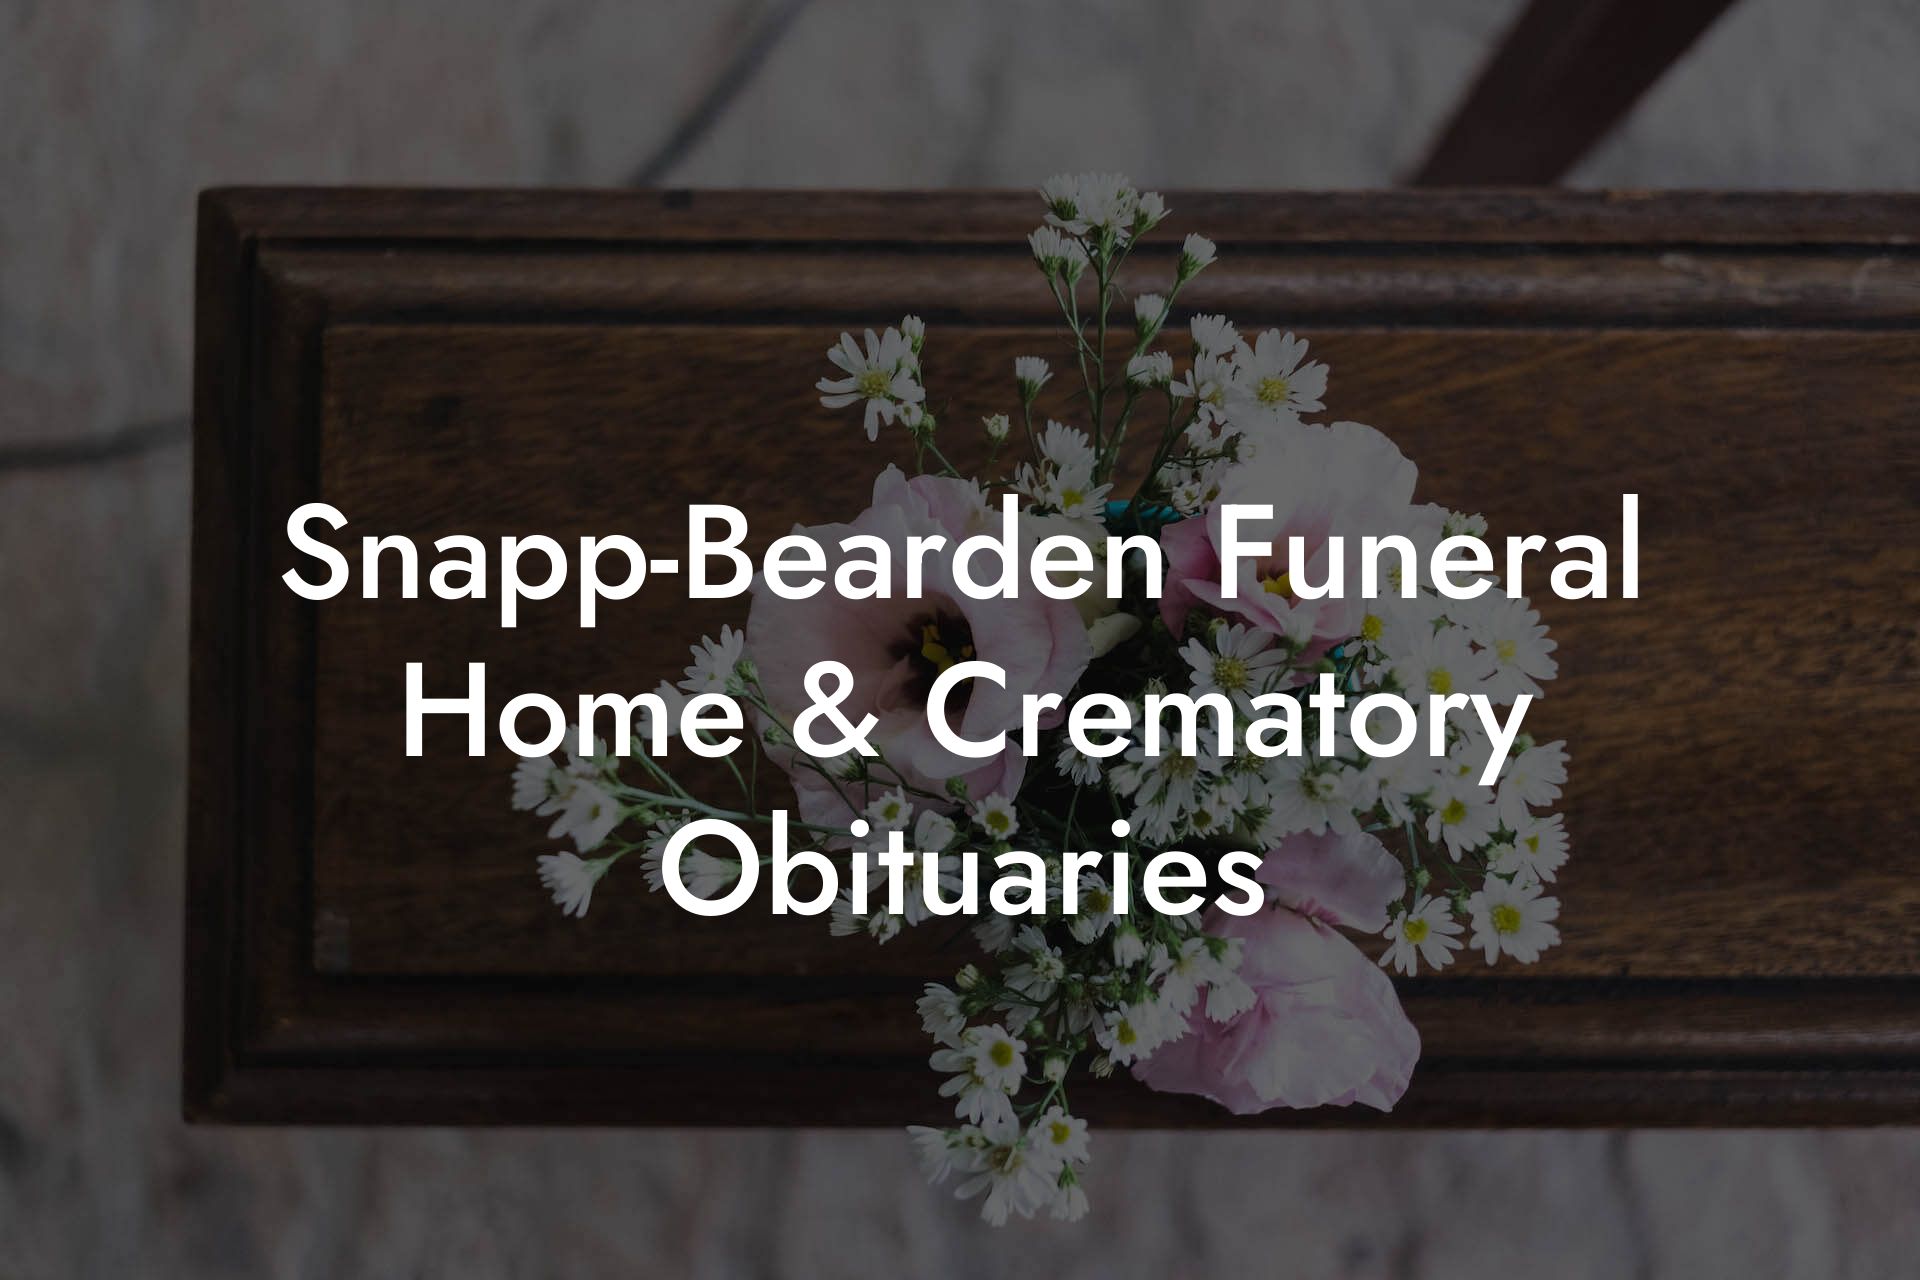 Snapp-Bearden Funeral Home & Crematory Obituaries